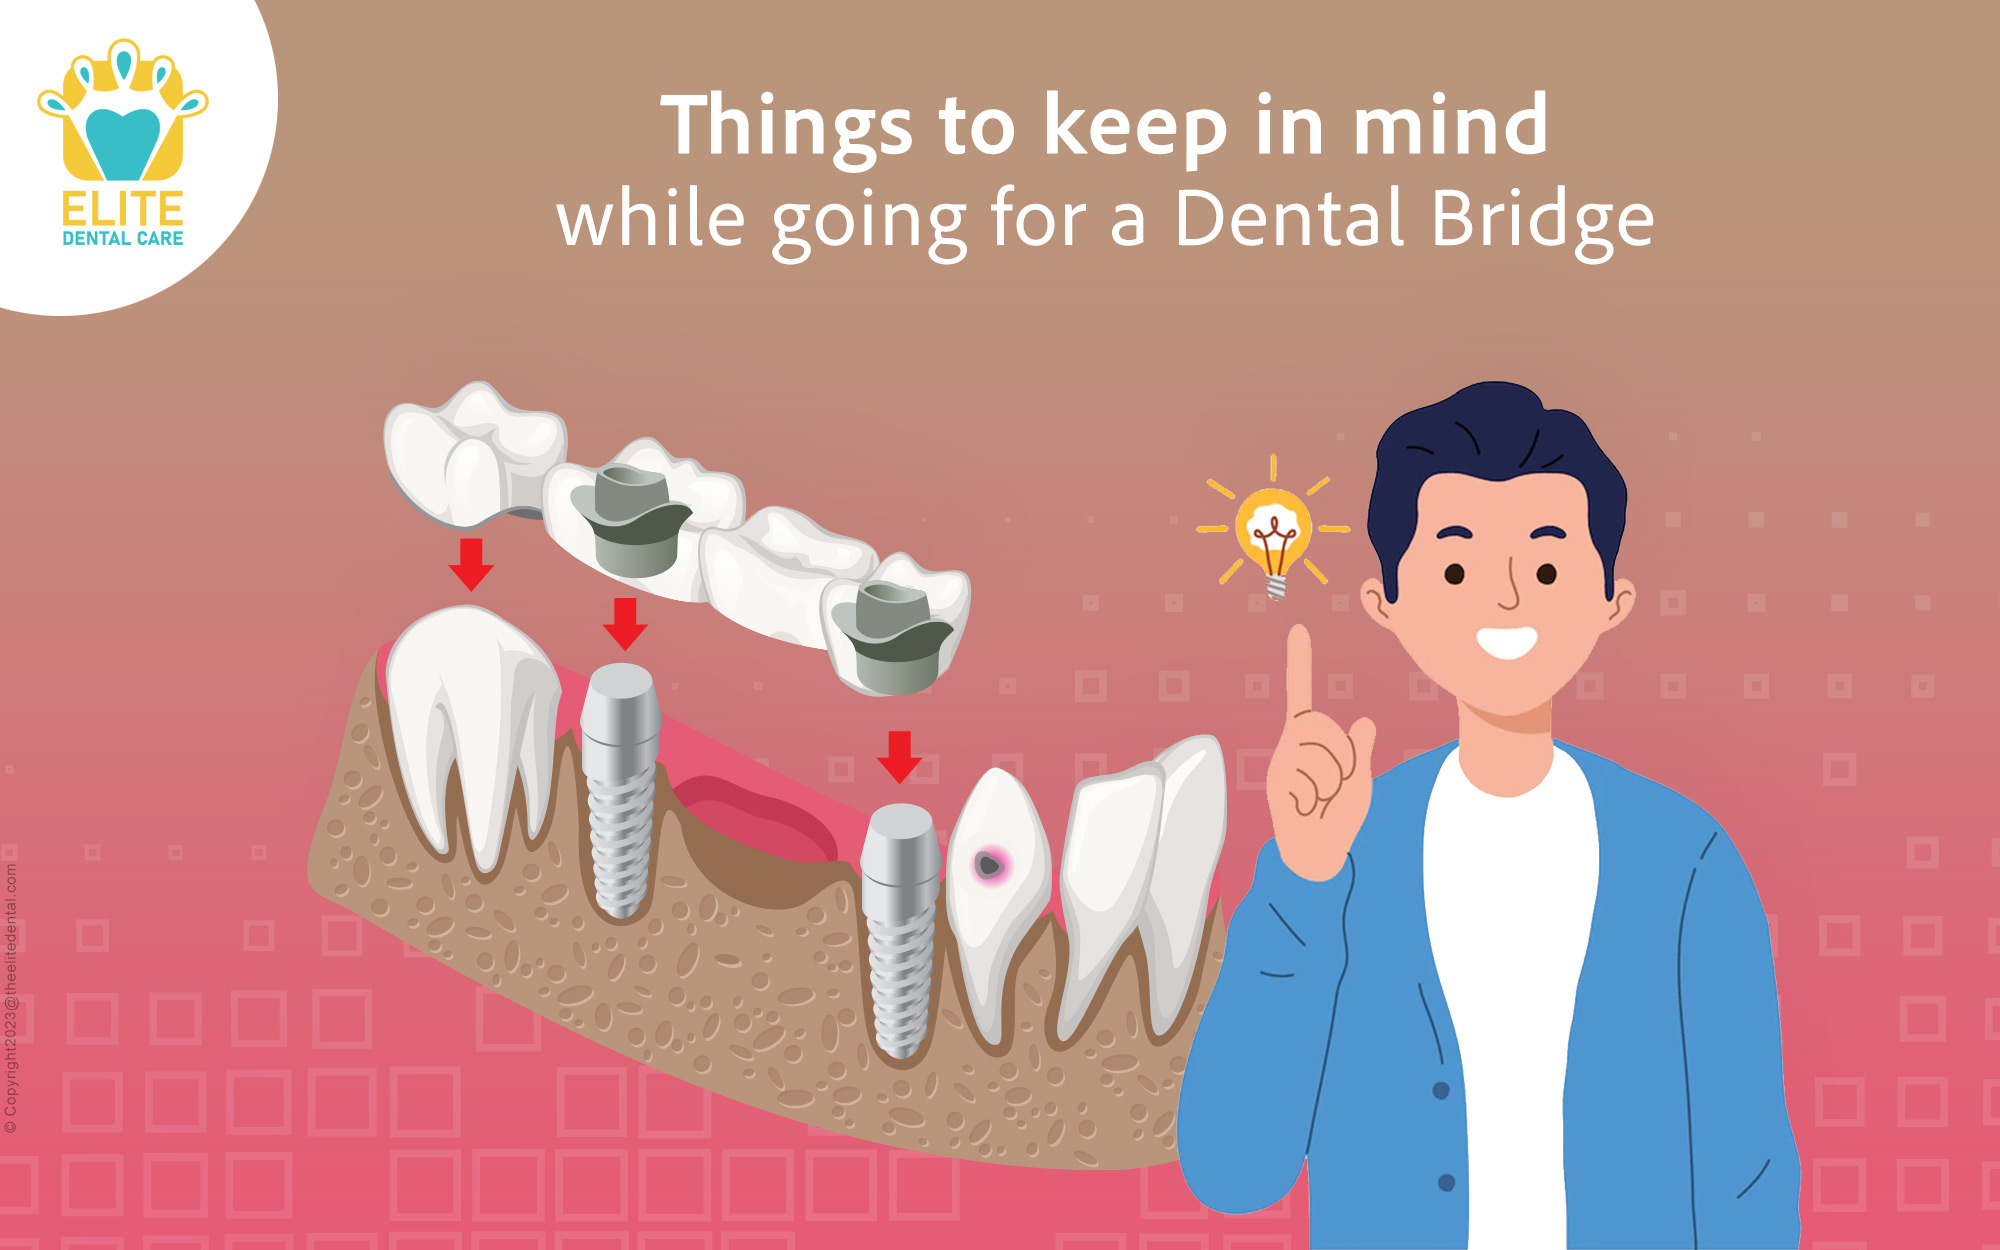 Things to keep in mind while going for a Dental Bridge